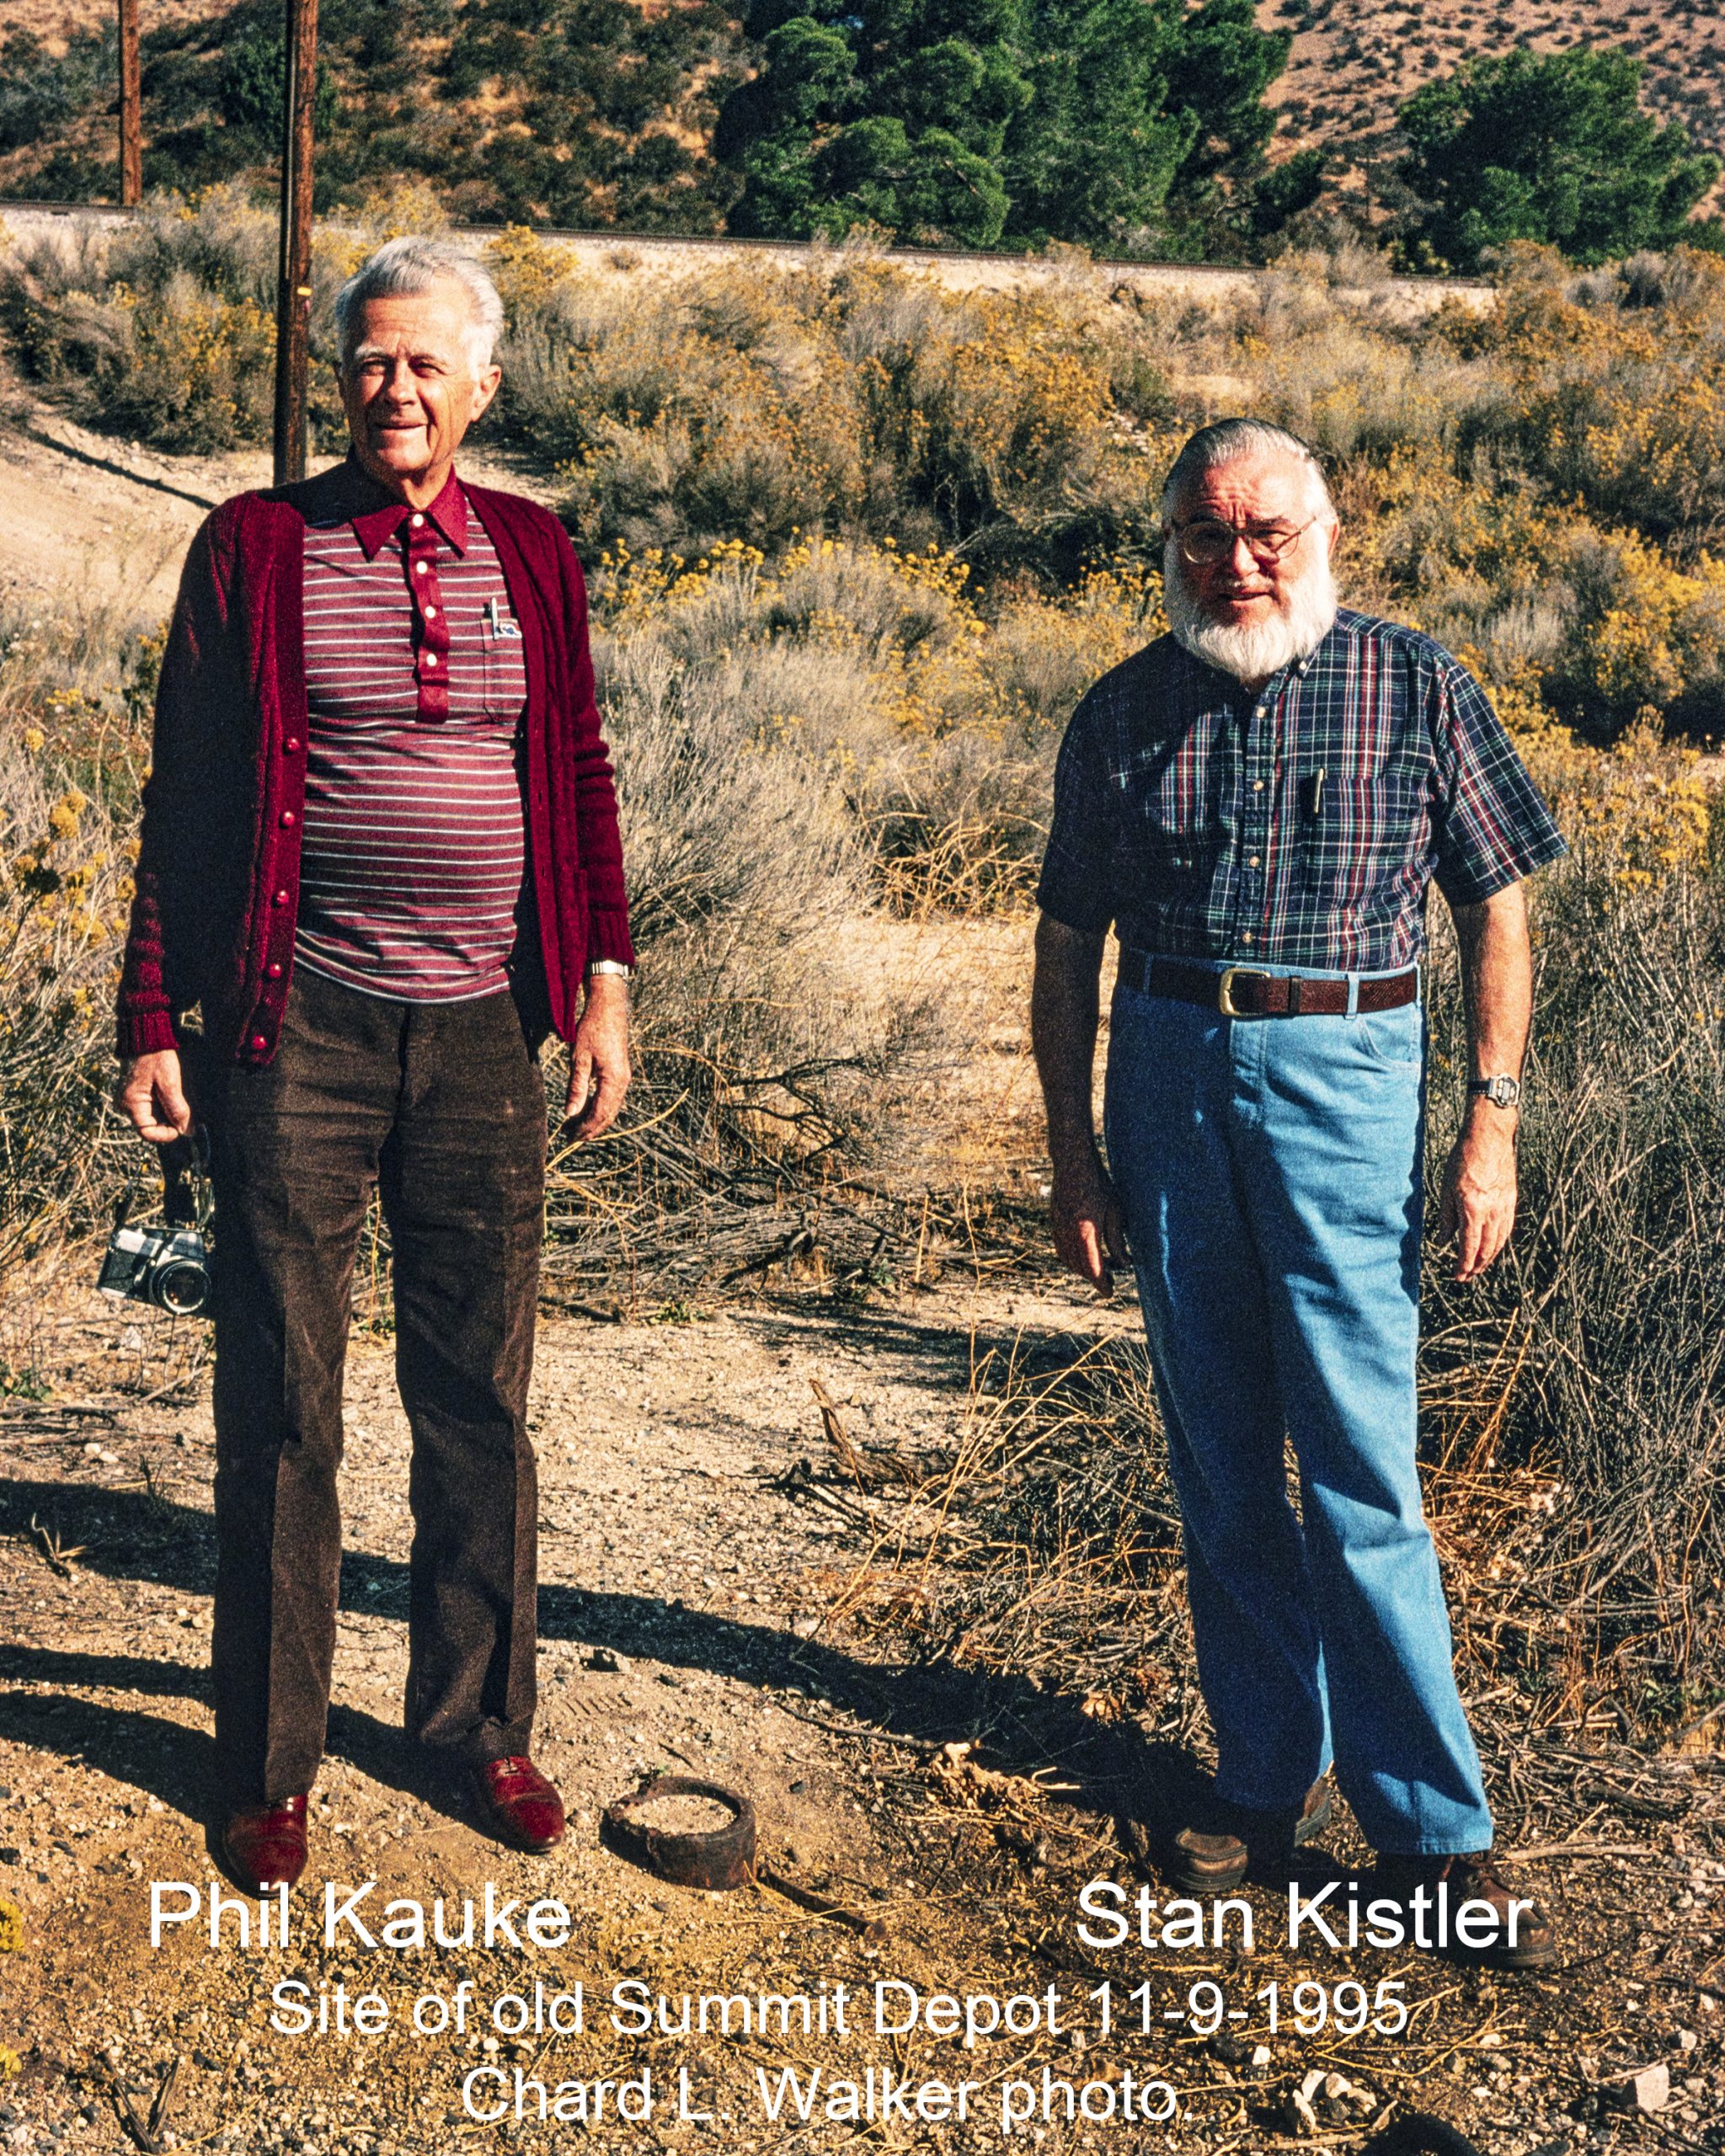 Phil Kauke and Stan Kistler at the site of the old Summit Depot November 9, 1995.